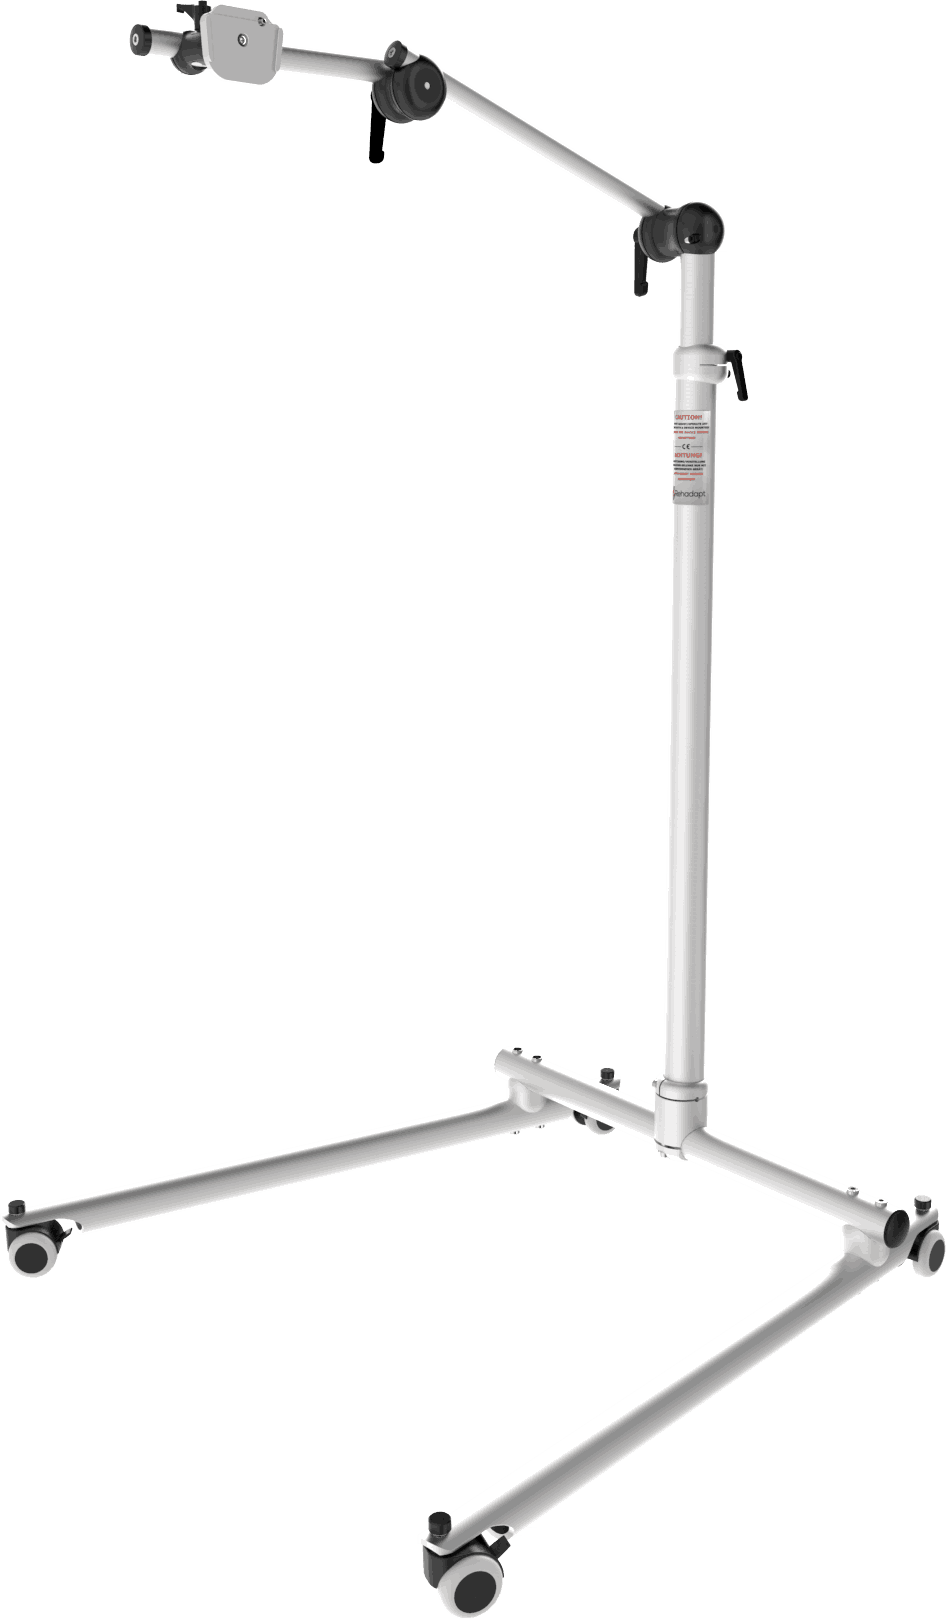 Classic Tele floor stand with adjustable height, by Rehadapt